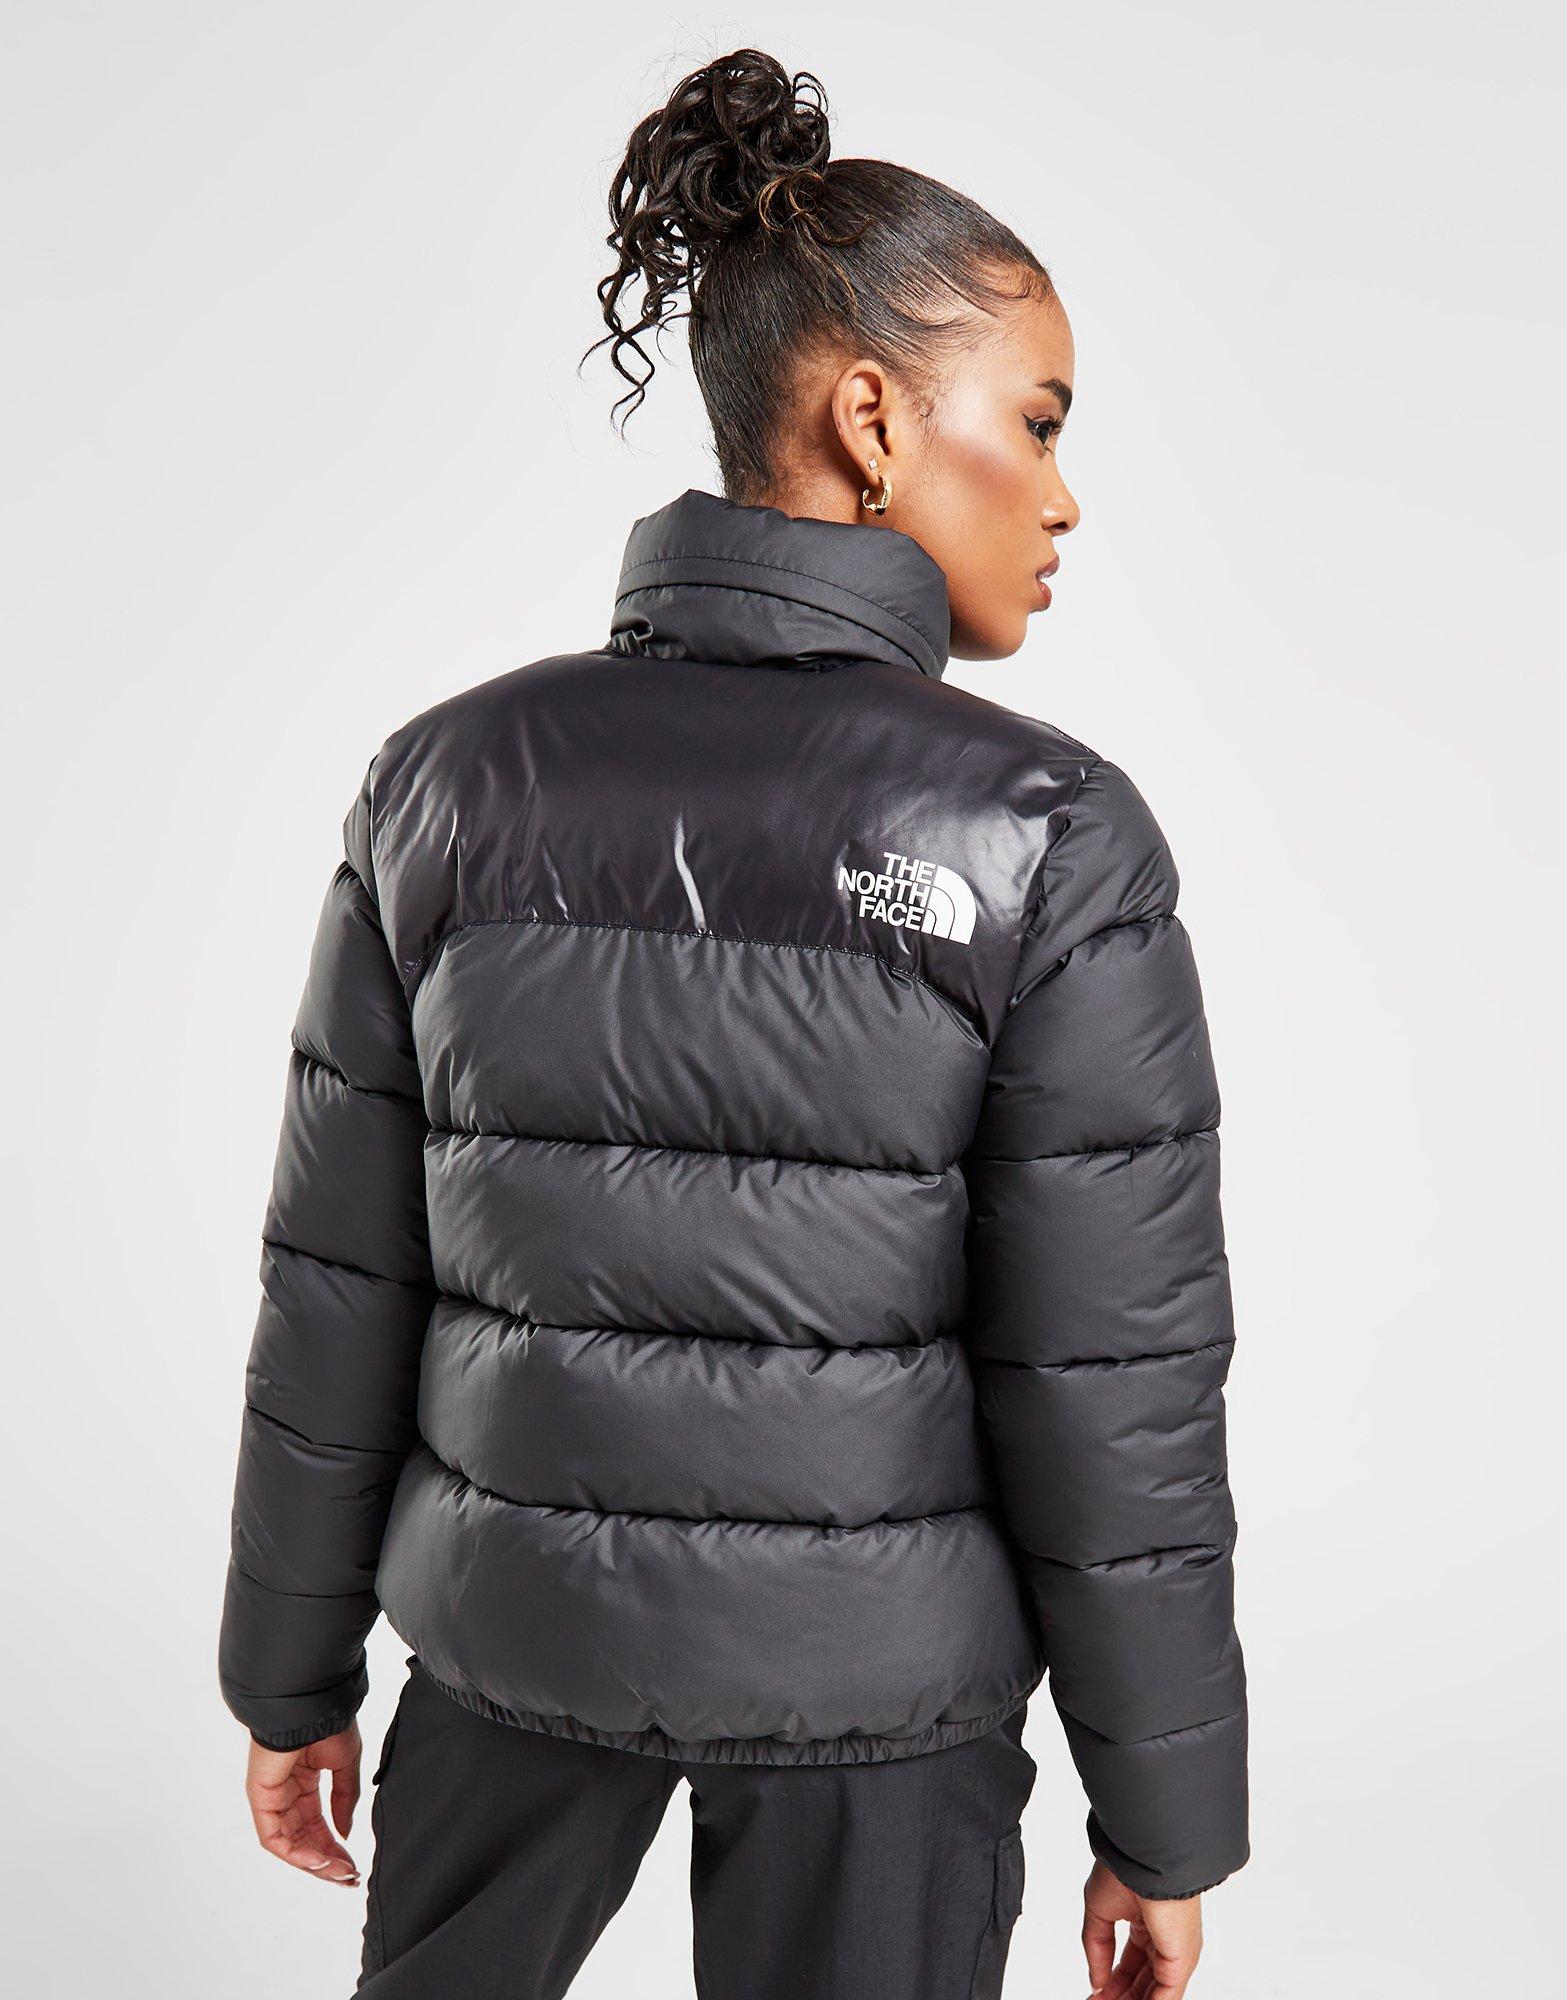 The North Face mujer - Logo Padded - JD Sports España